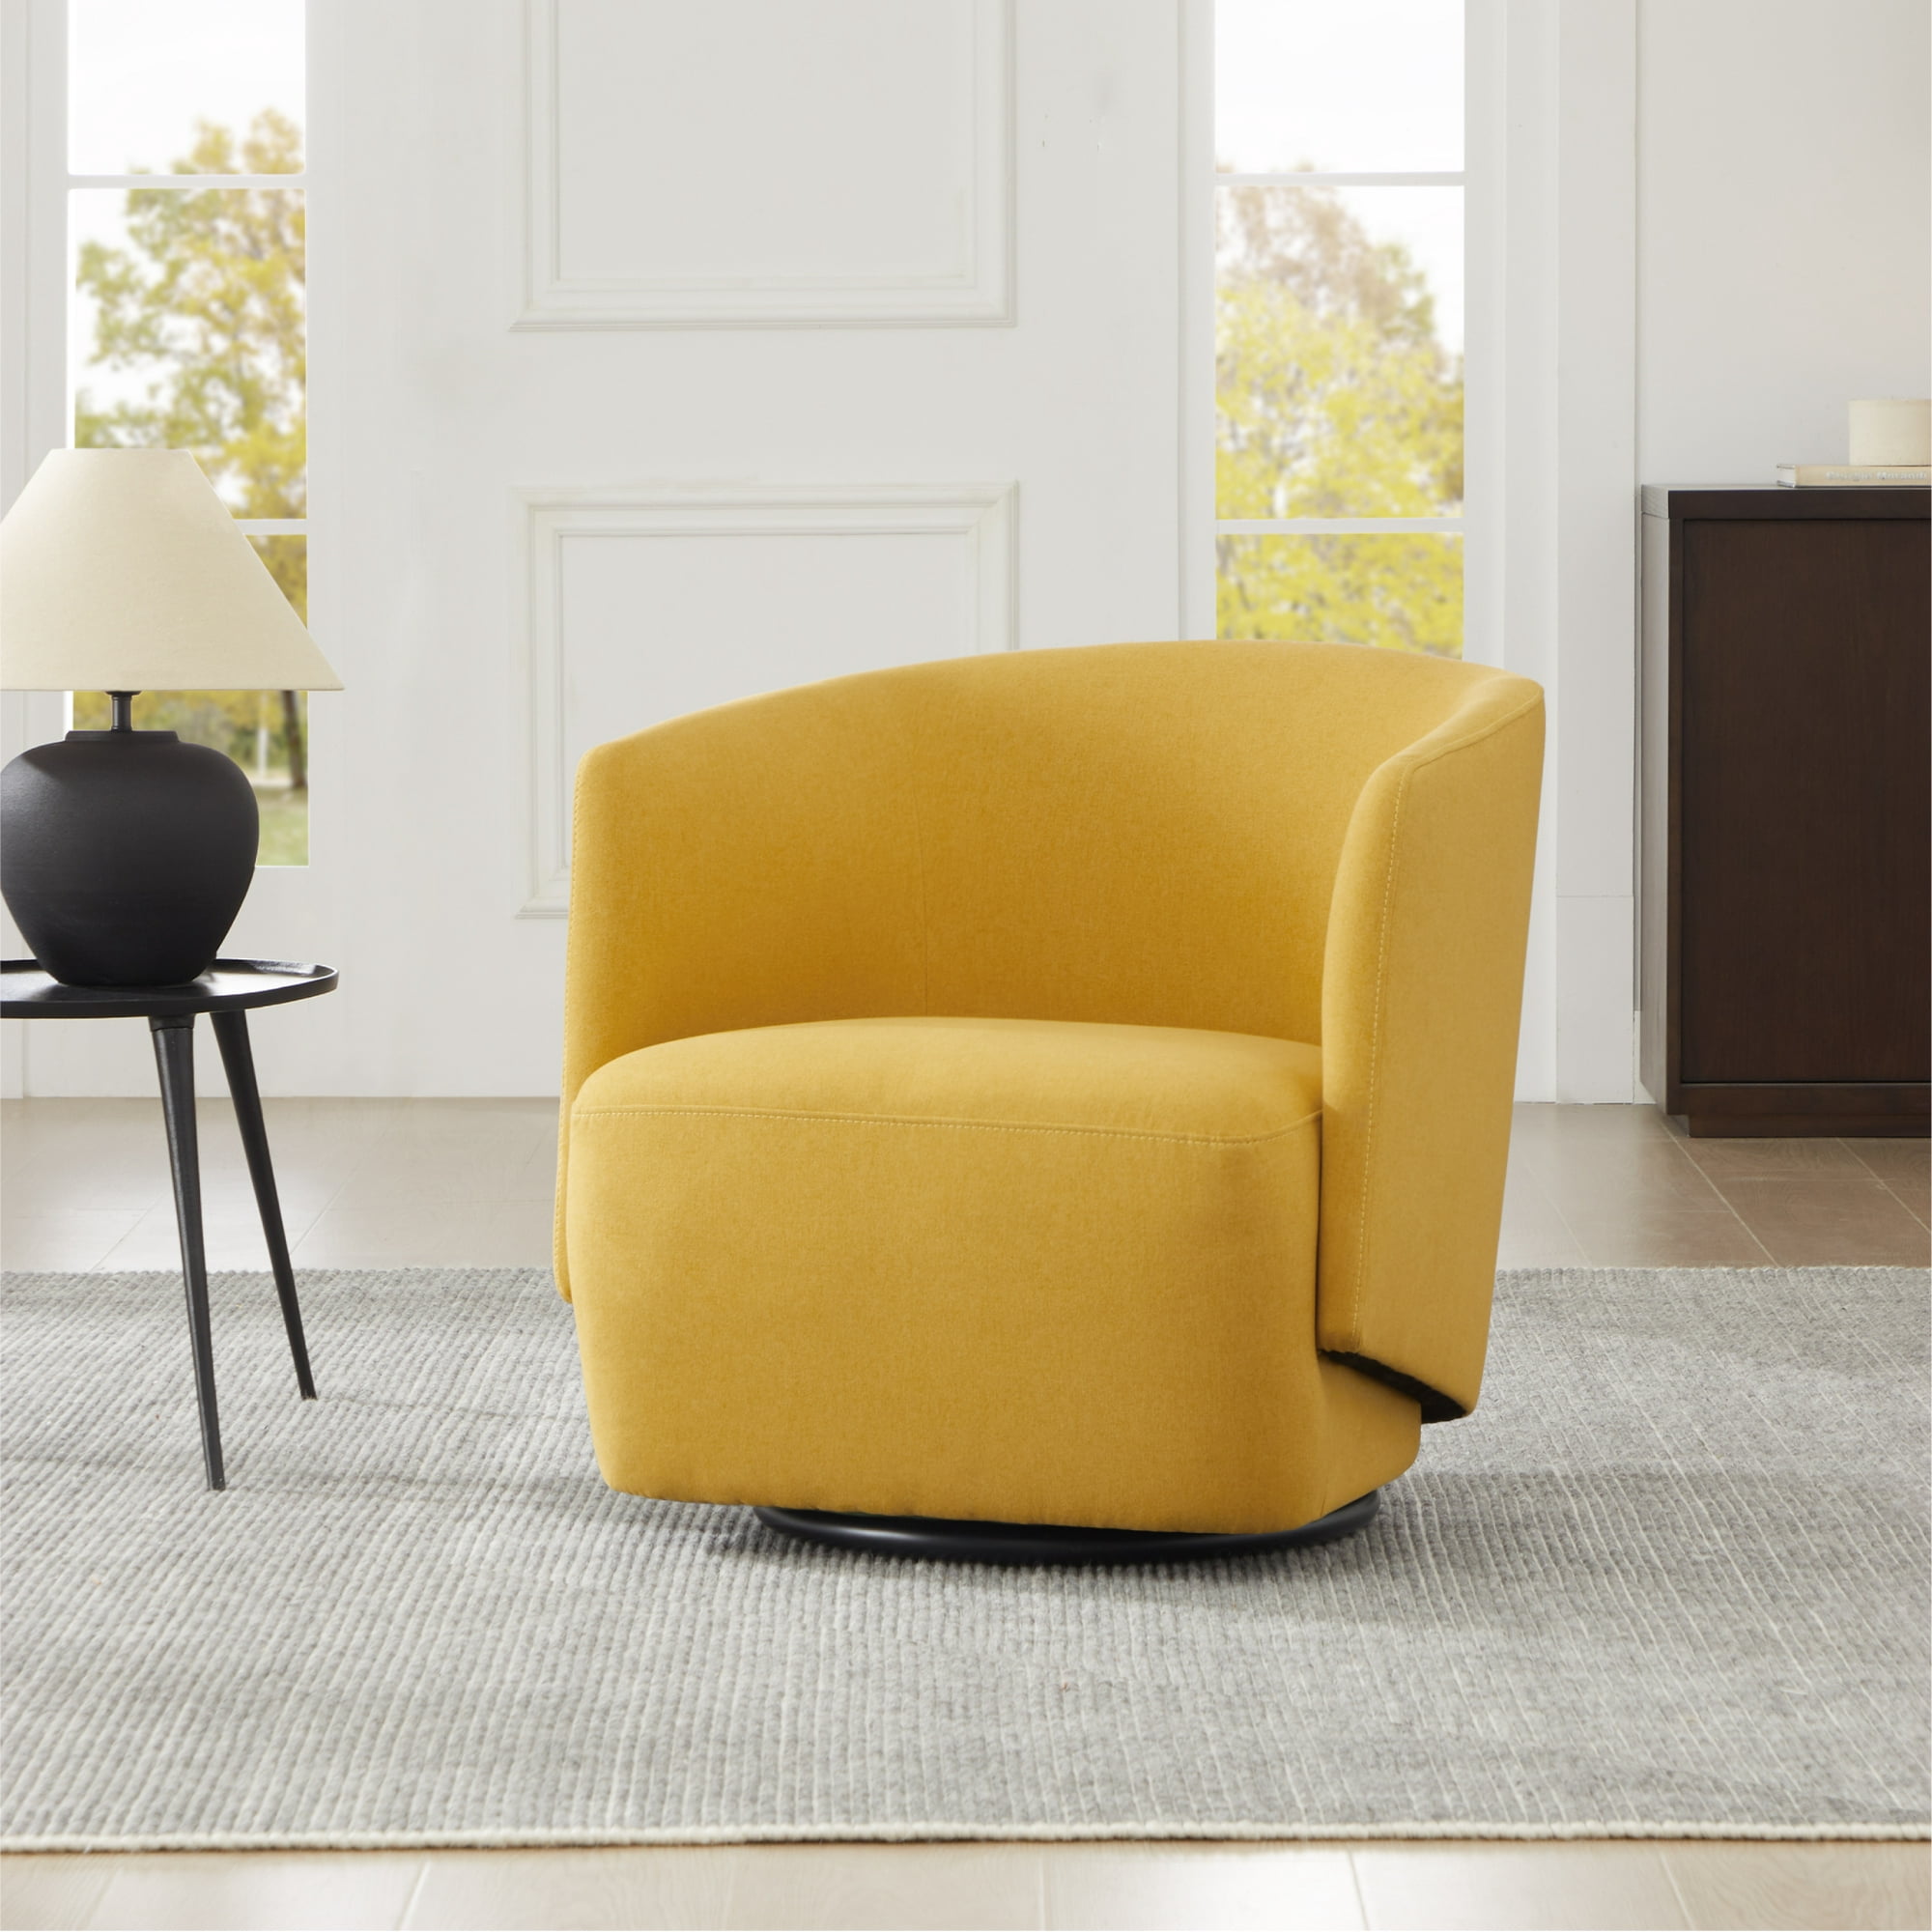 CHITA Swivel Accent Chair Upholstered Barrel Arm Chair for Living Room Bedroom, Fabric in Yellow